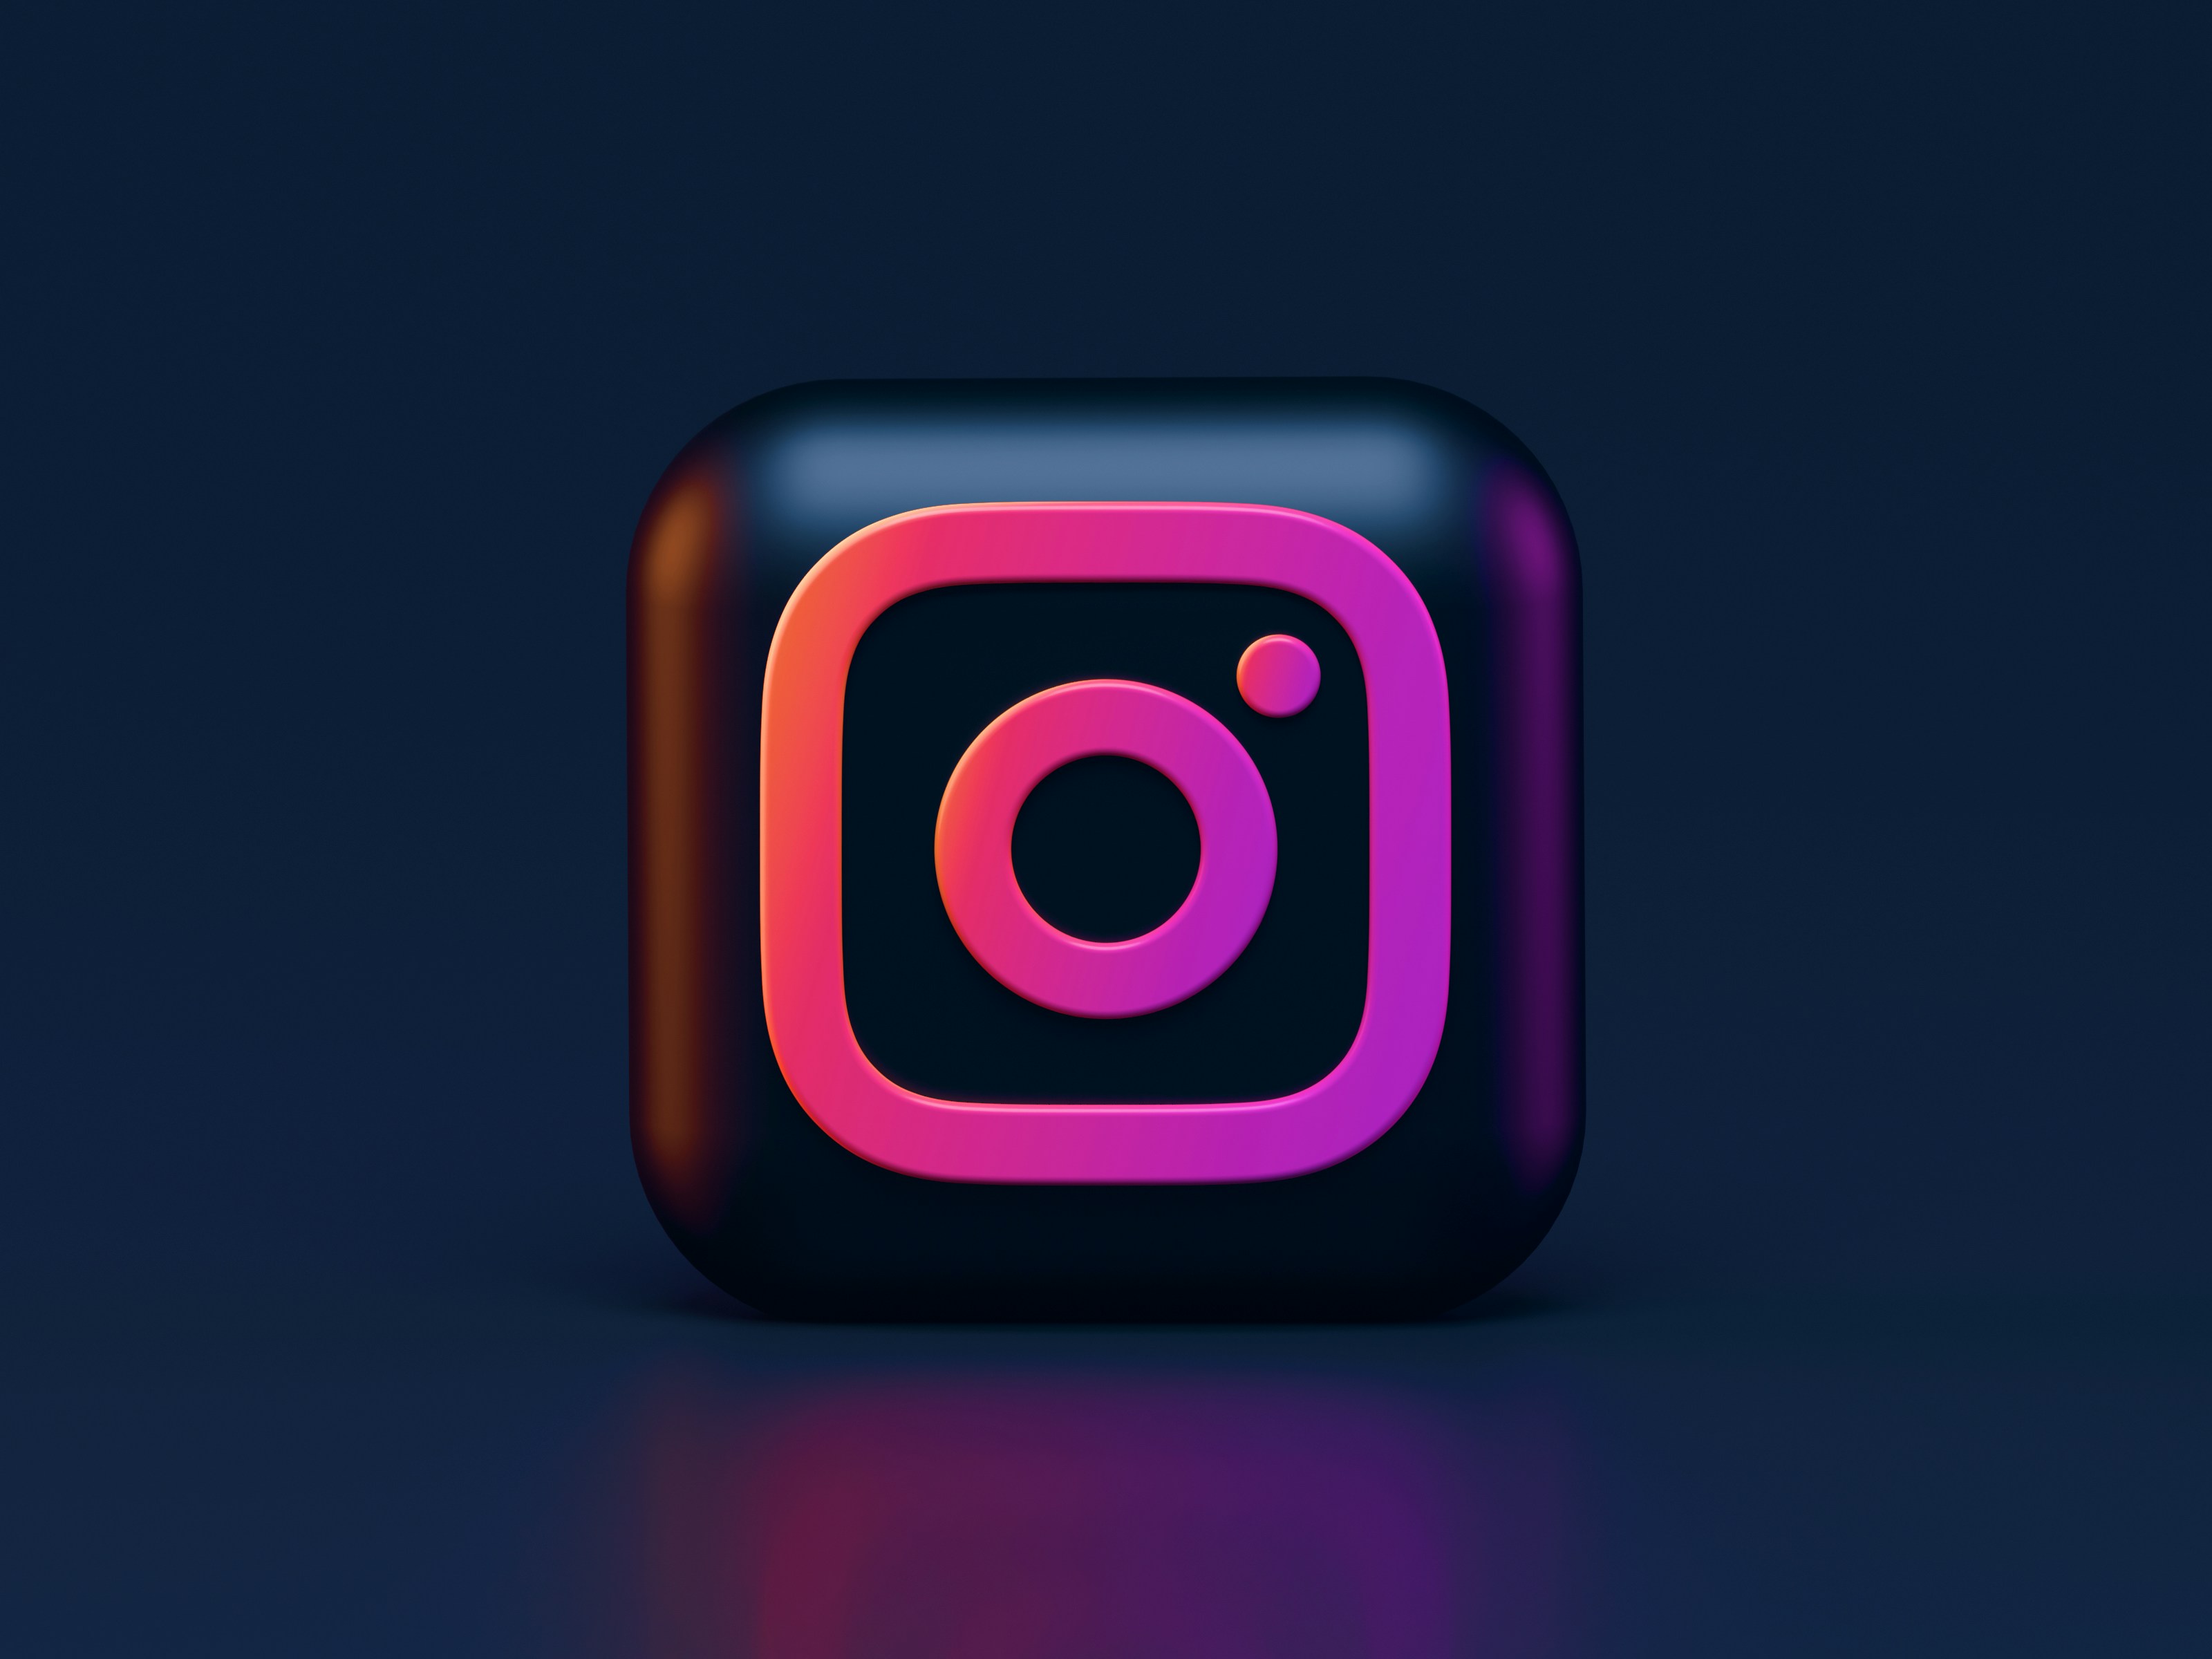 Instagram Dark Mode 3D icon concept. Write me: alexanderbemore@gmail.com, if you need 3D visuals for your products.